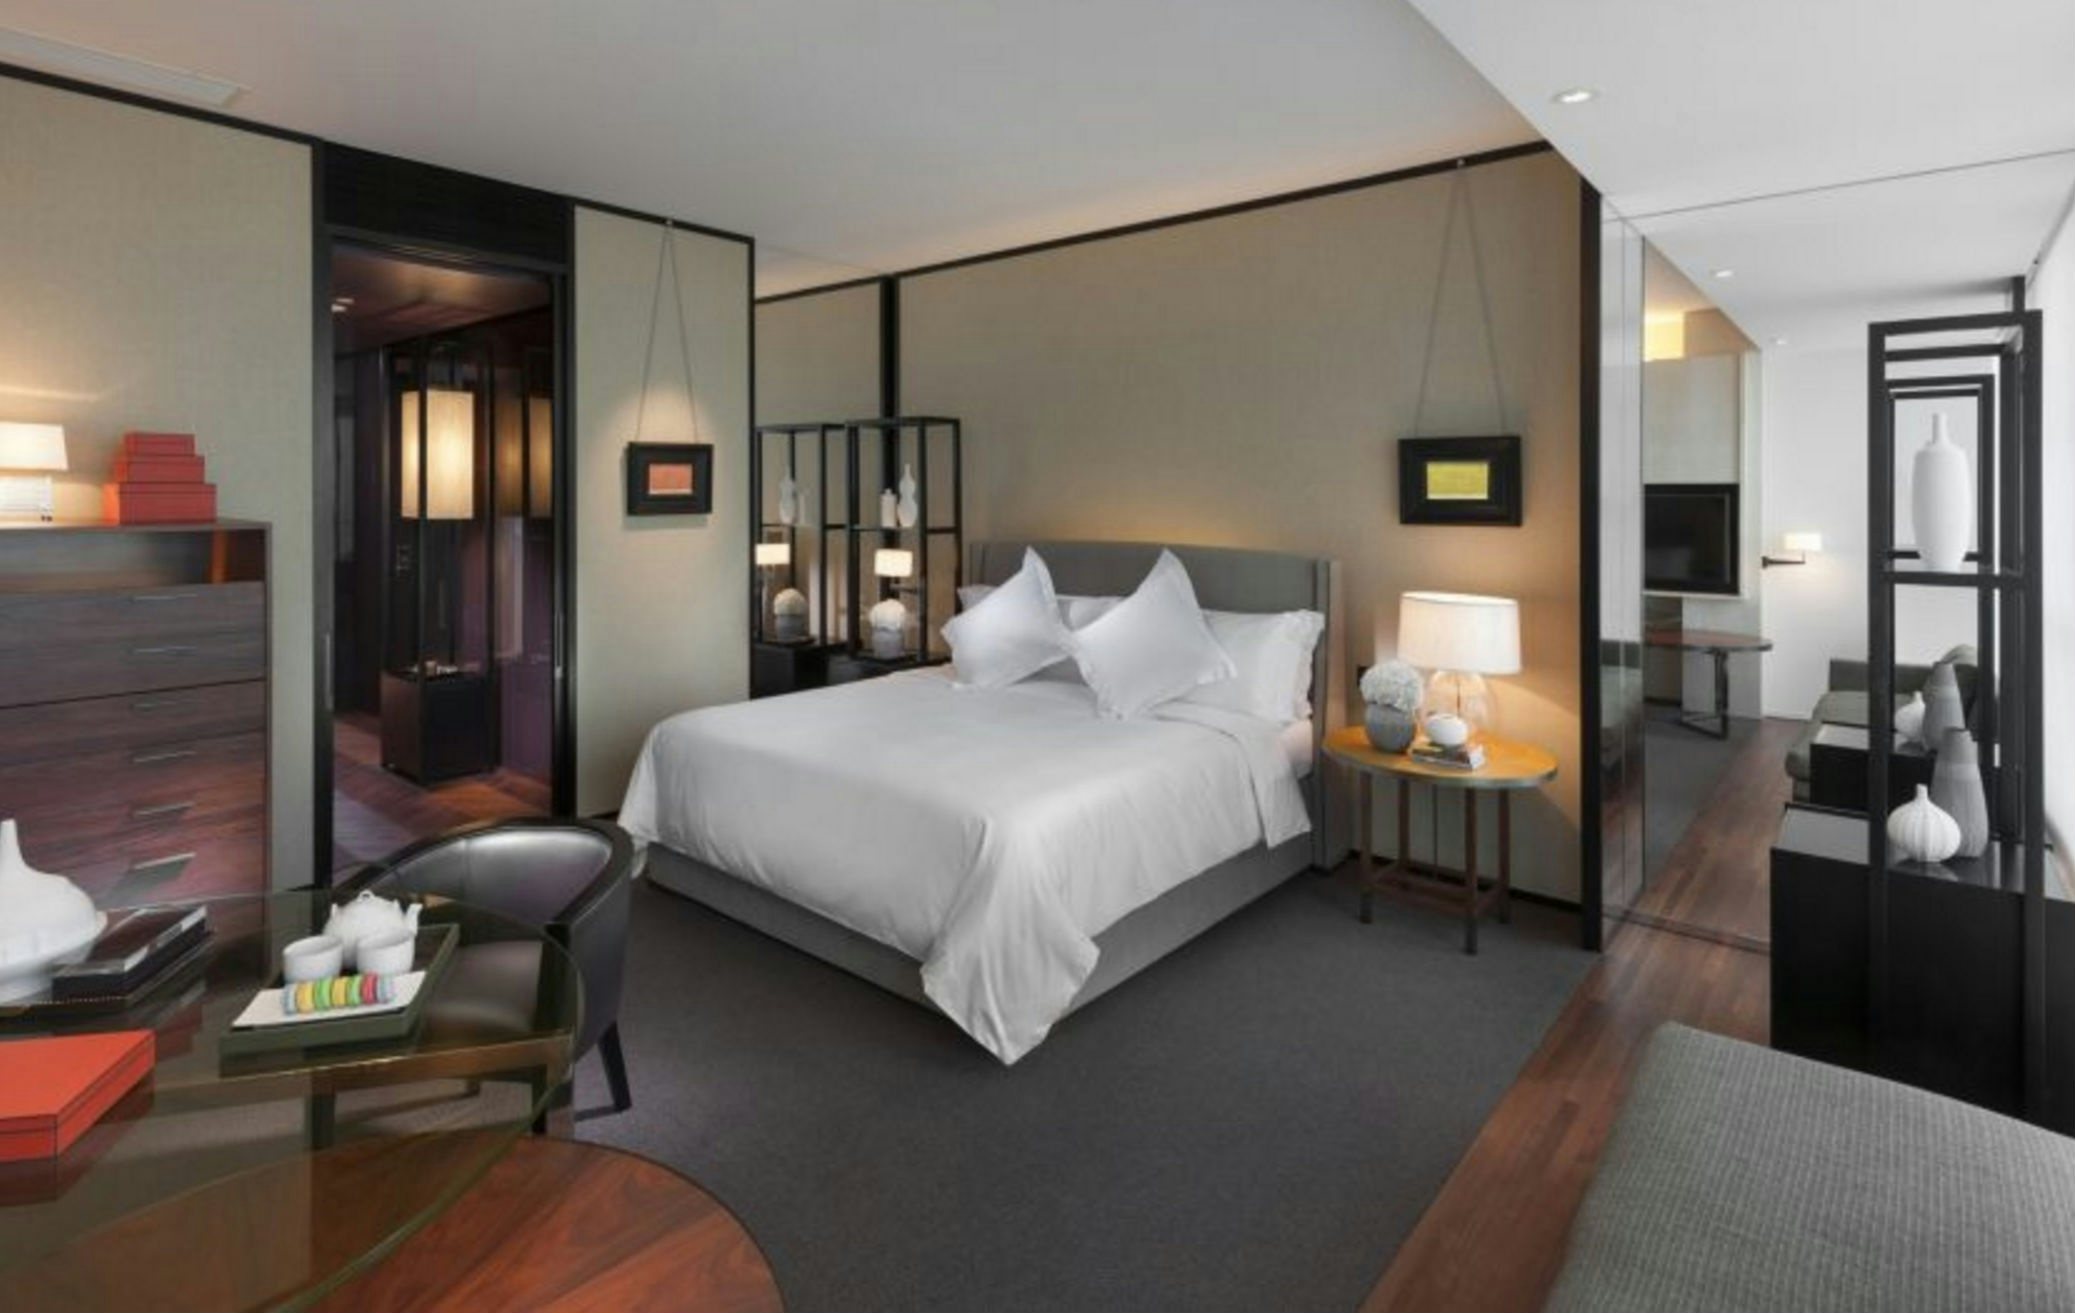 Mandarin Oriental Guangzhou ranked number 14 in guest satisfaction, according to ReviewPro data. (Courtesy Photo)